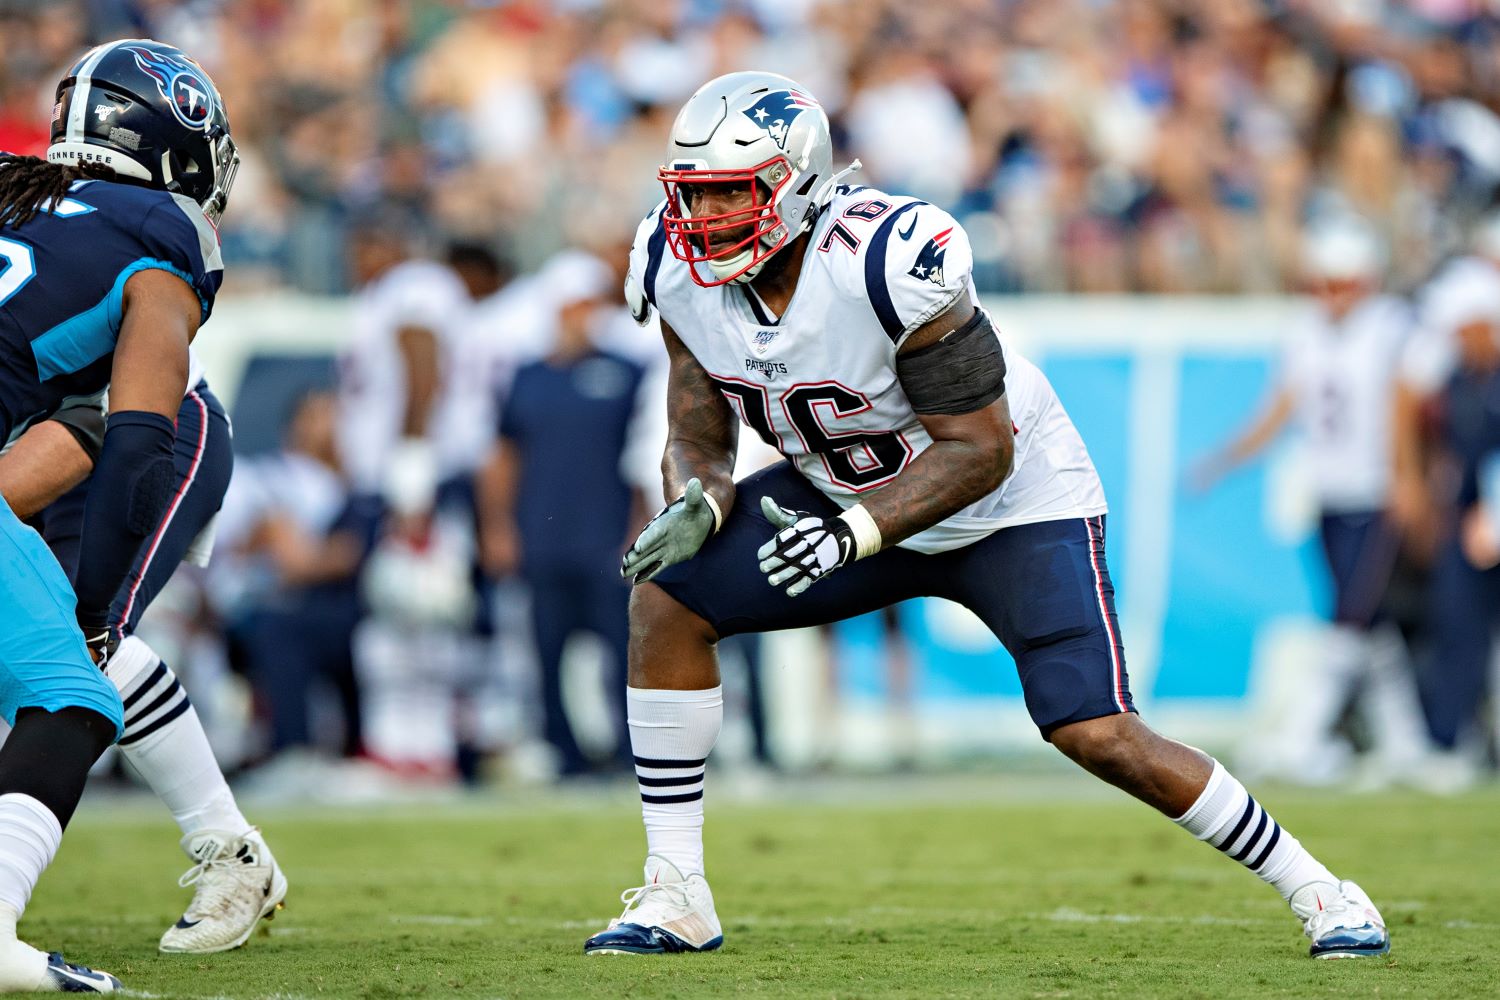 The New England Patriots will have to find a new left tackle now that 2018 first-round pick Isaiah Wynn is heading to injured reserve.